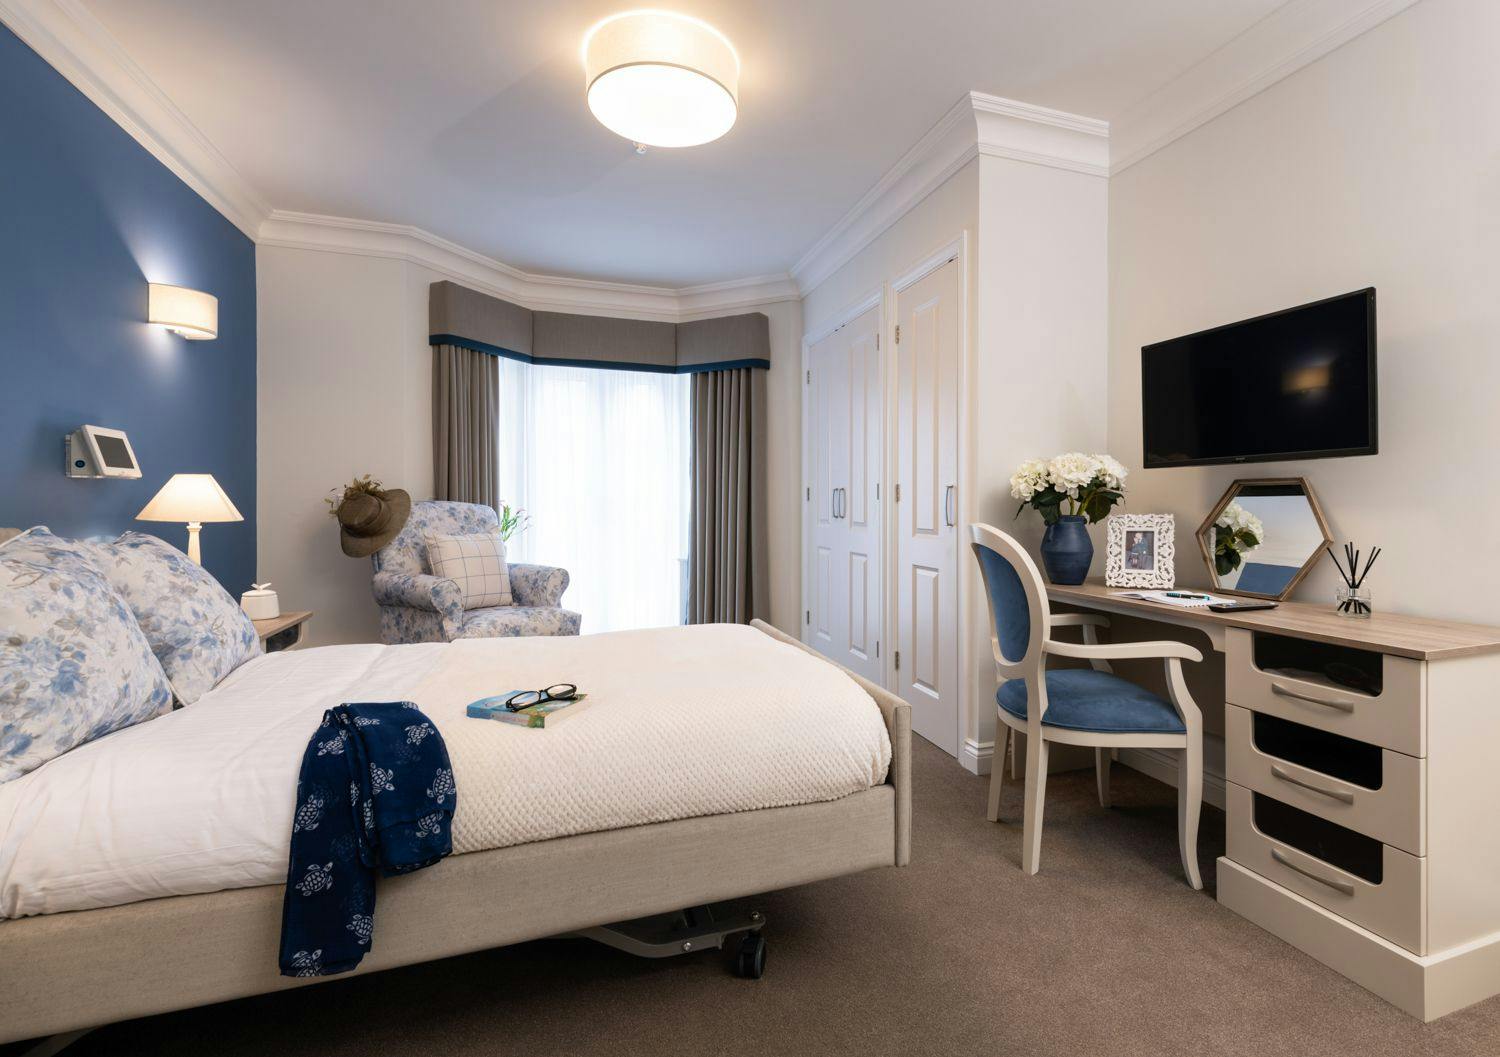 Bedroom of Henley Manor Care Home in Henley-on-Thames, South Oxfordshire